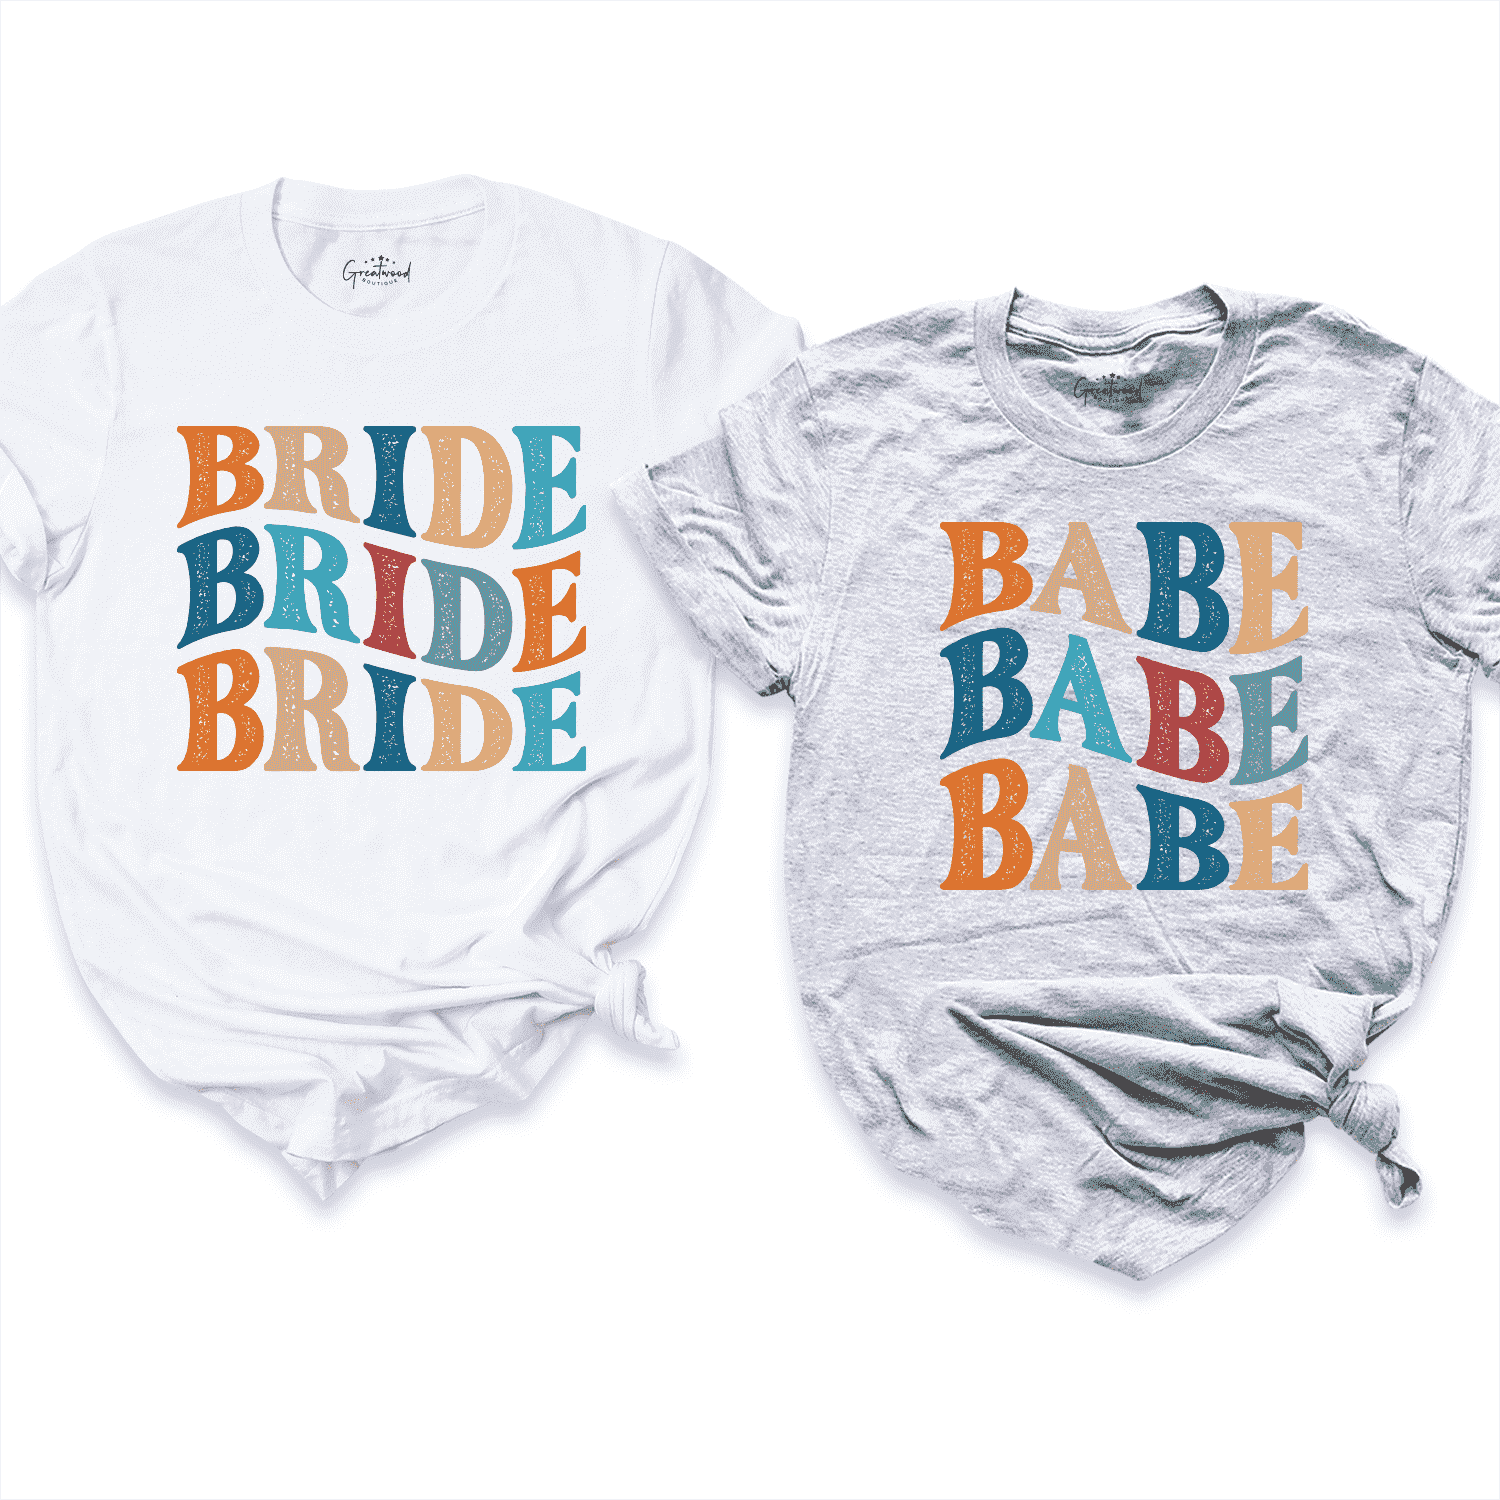 Bride & Babe Shirt White - Greatwood Boutique